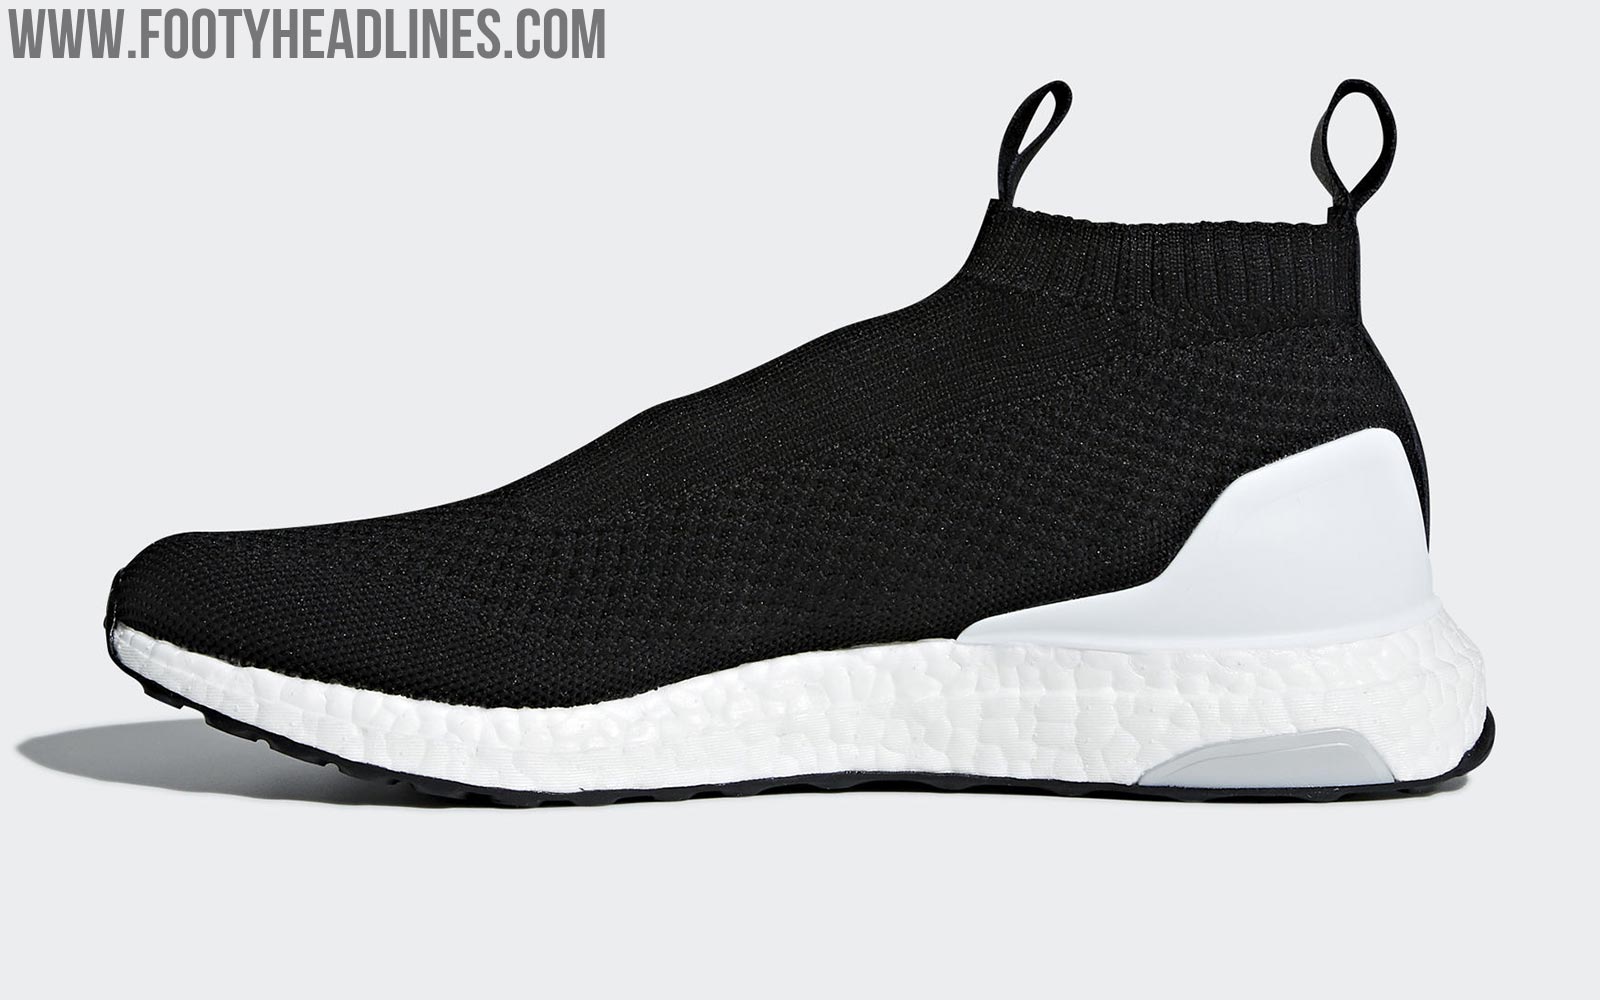 Three Stunning Adidas Ace 16+ Ultra Boost Sneakers Released - Footy ...